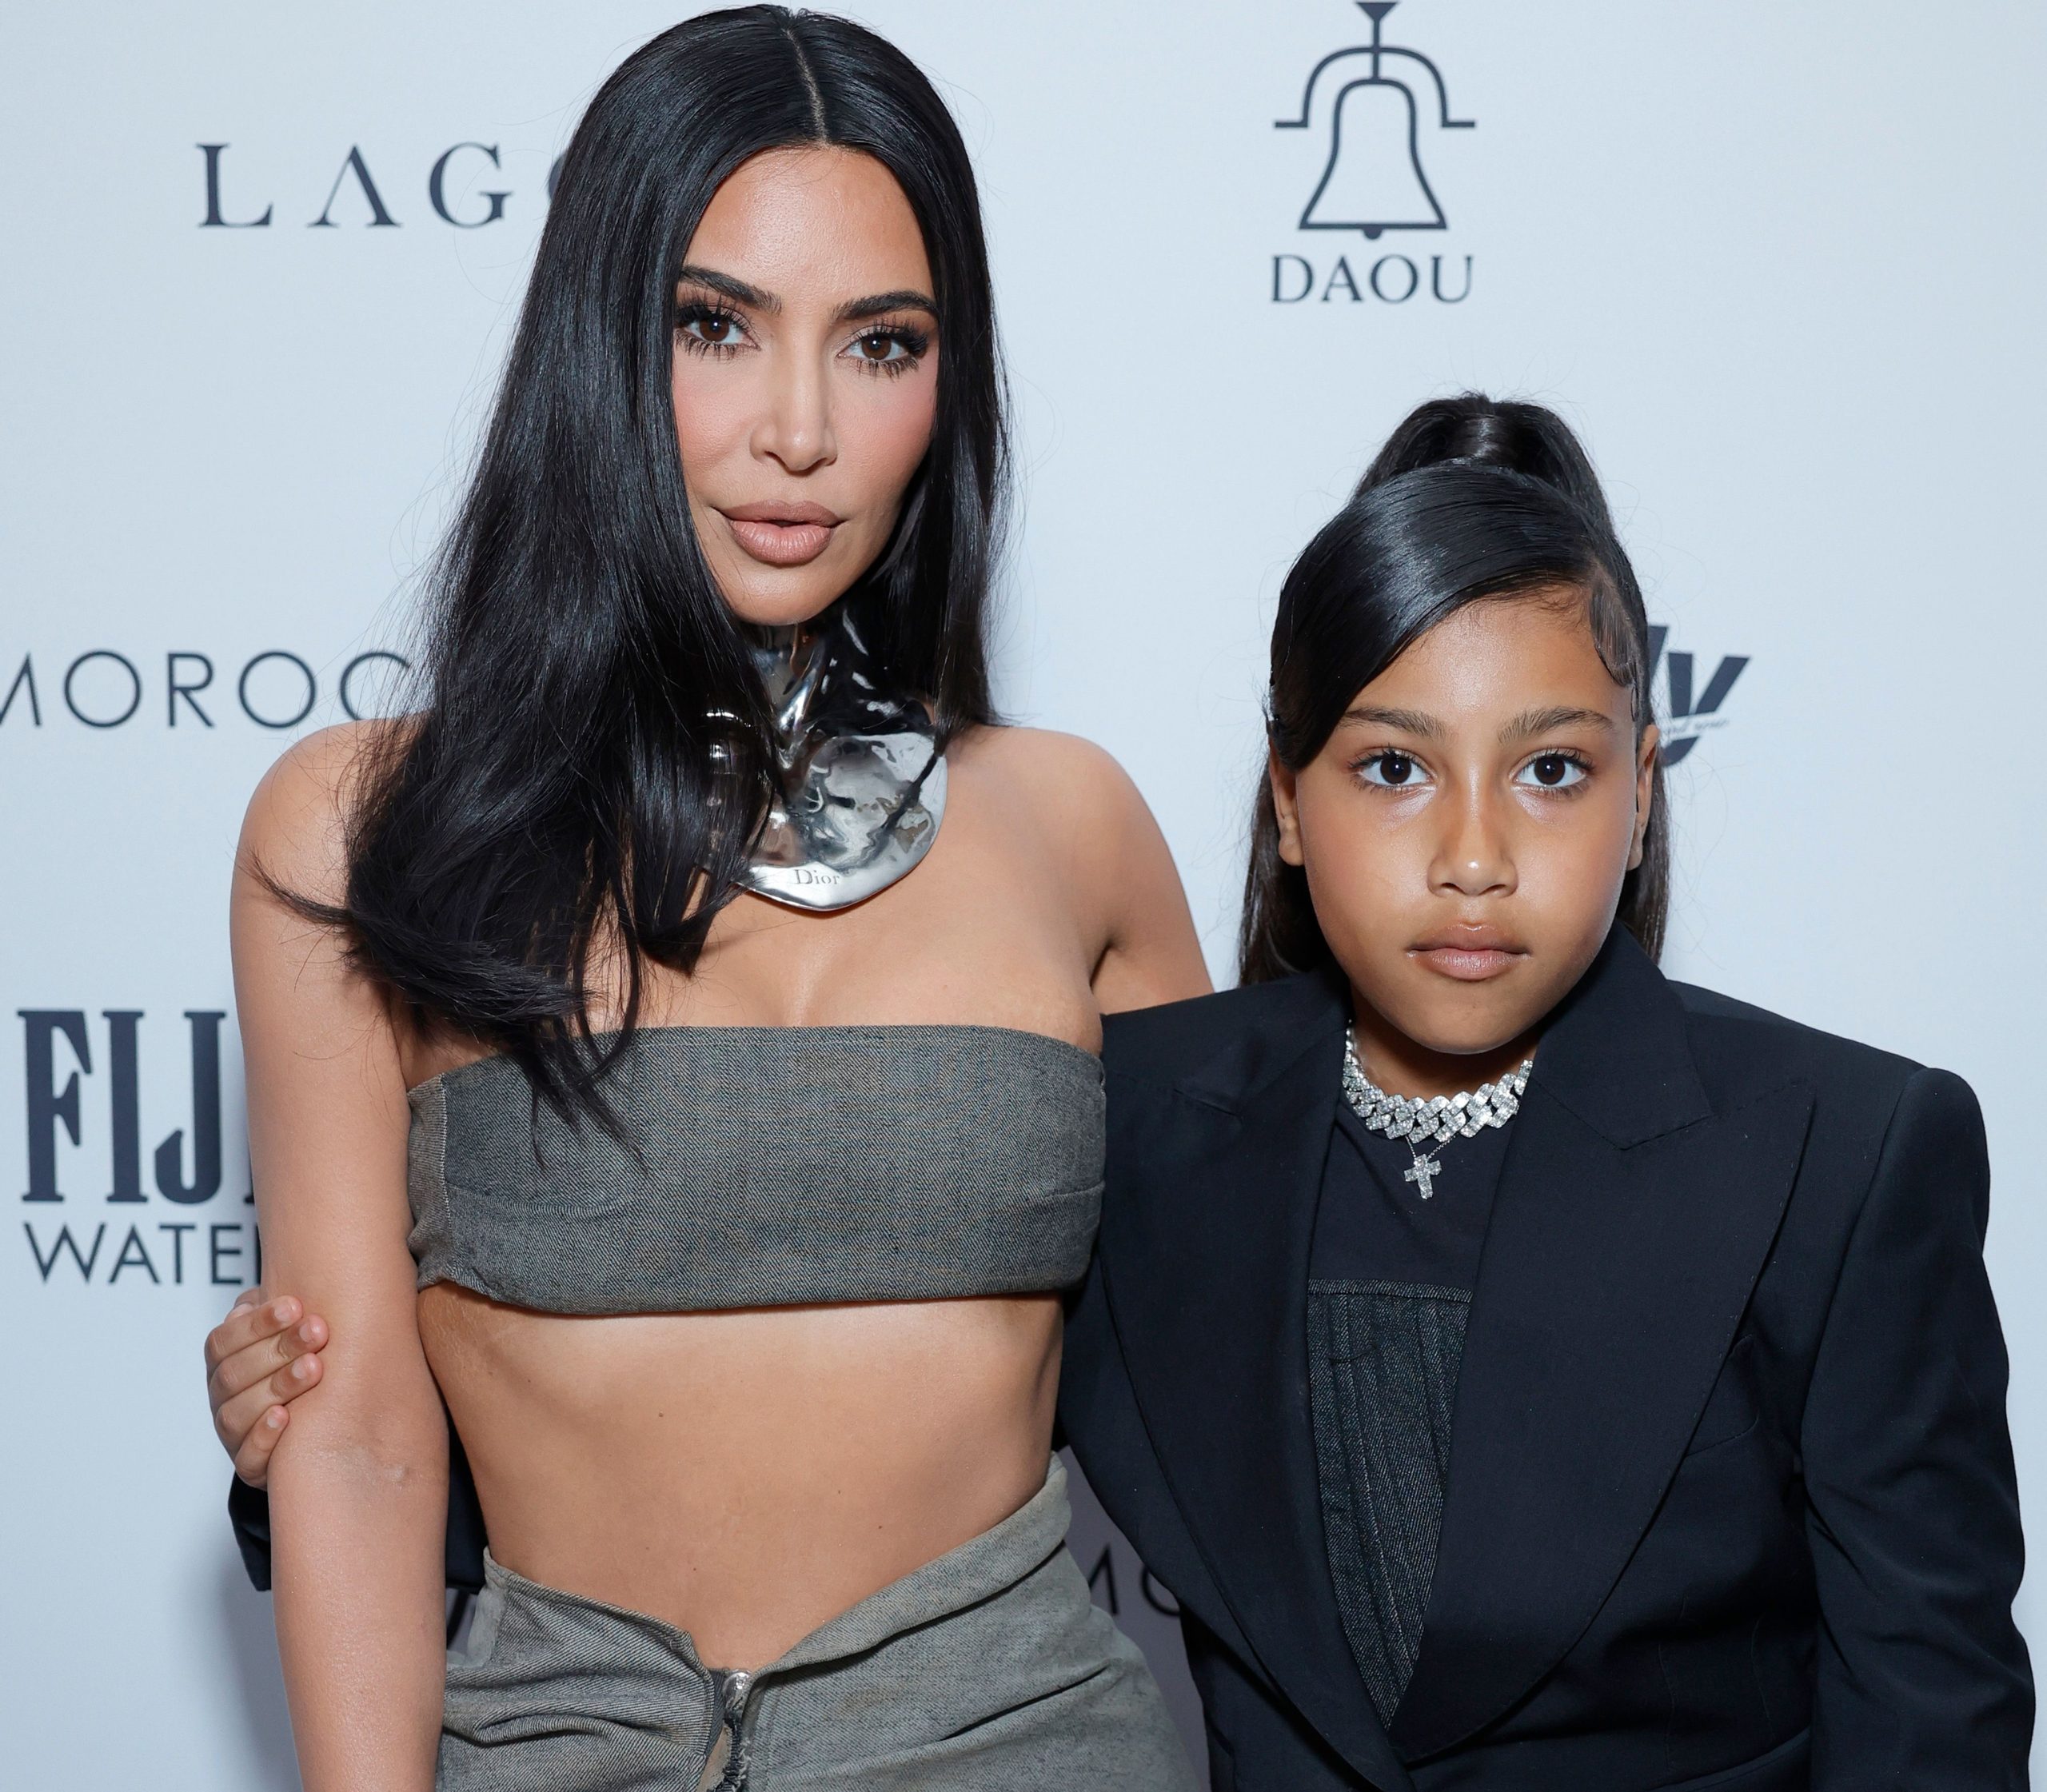 North West is Bound to Make Music History